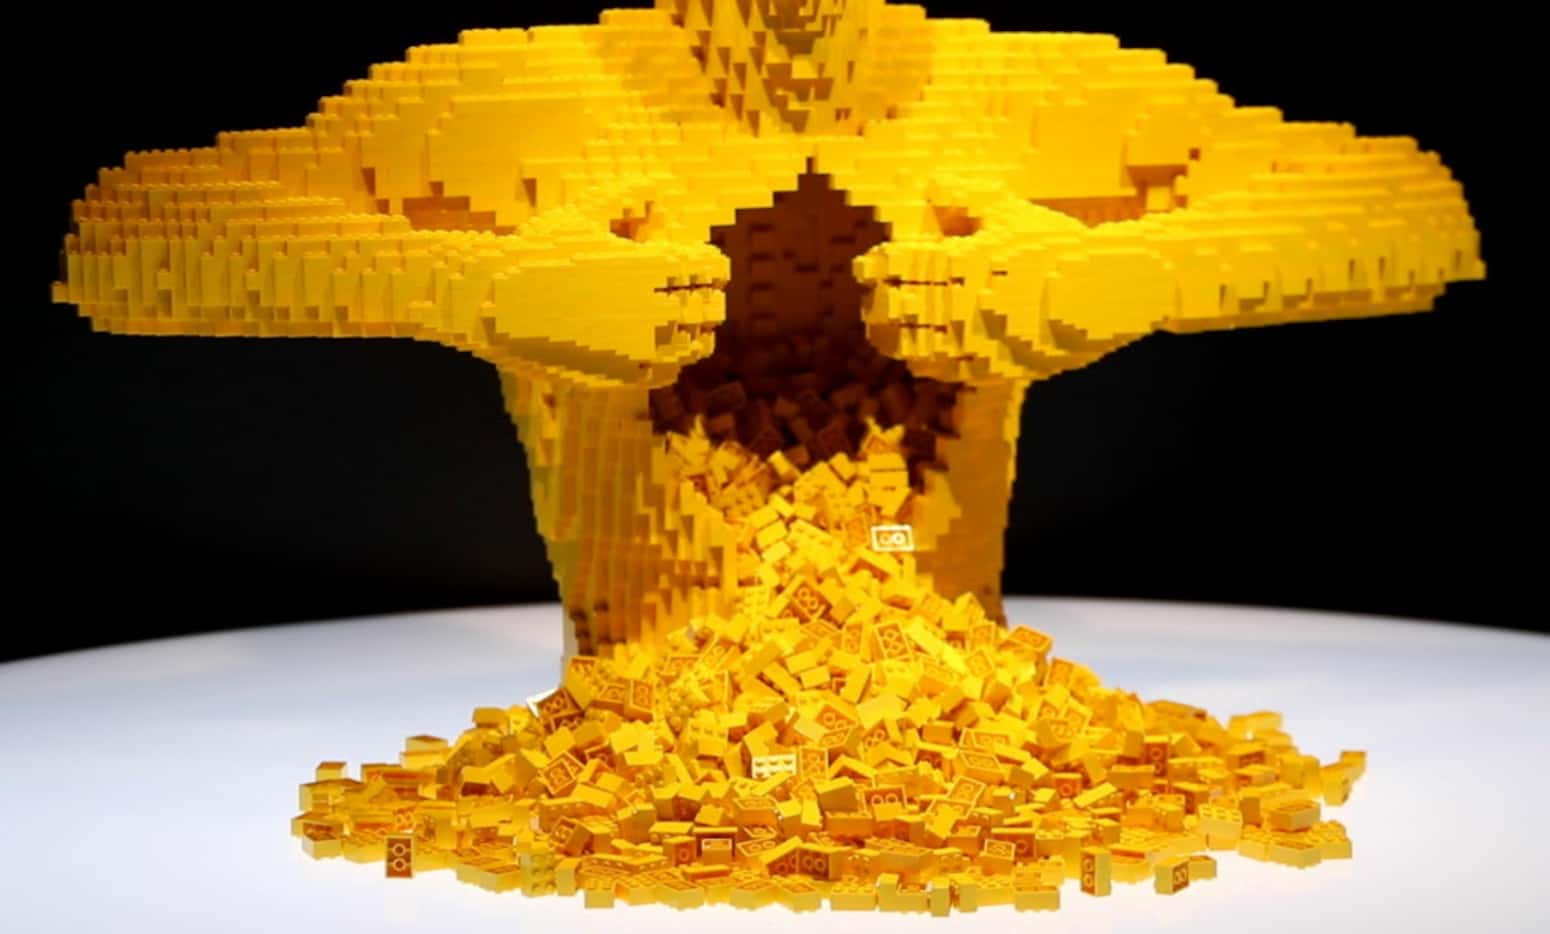 Yellow, from The Art of the Brick! LEGO art exhibit by Nathan Sawaya on display Thursday at...